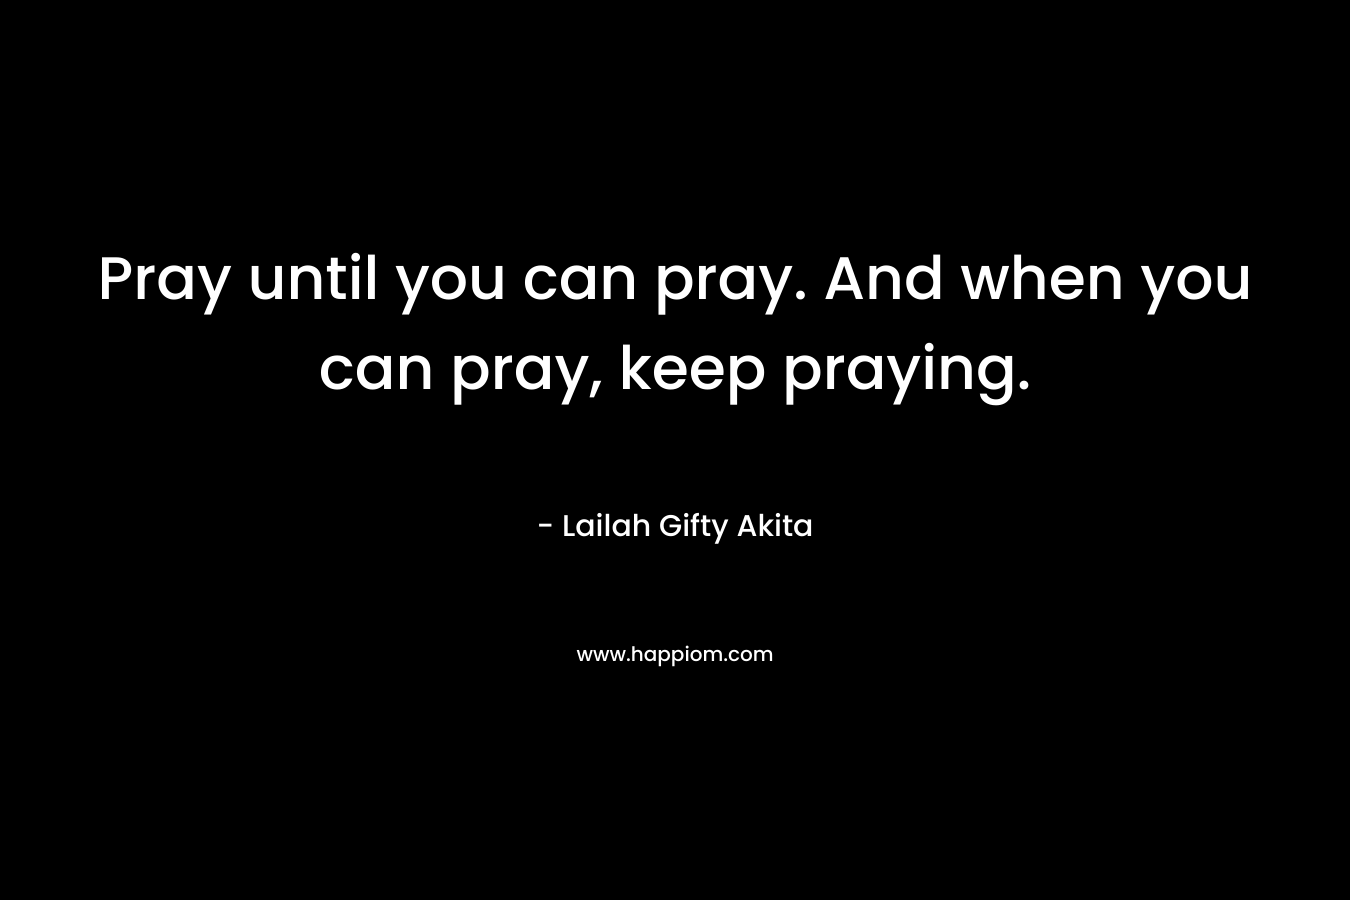 Pray until you can pray. And when you can pray,  keep praying.